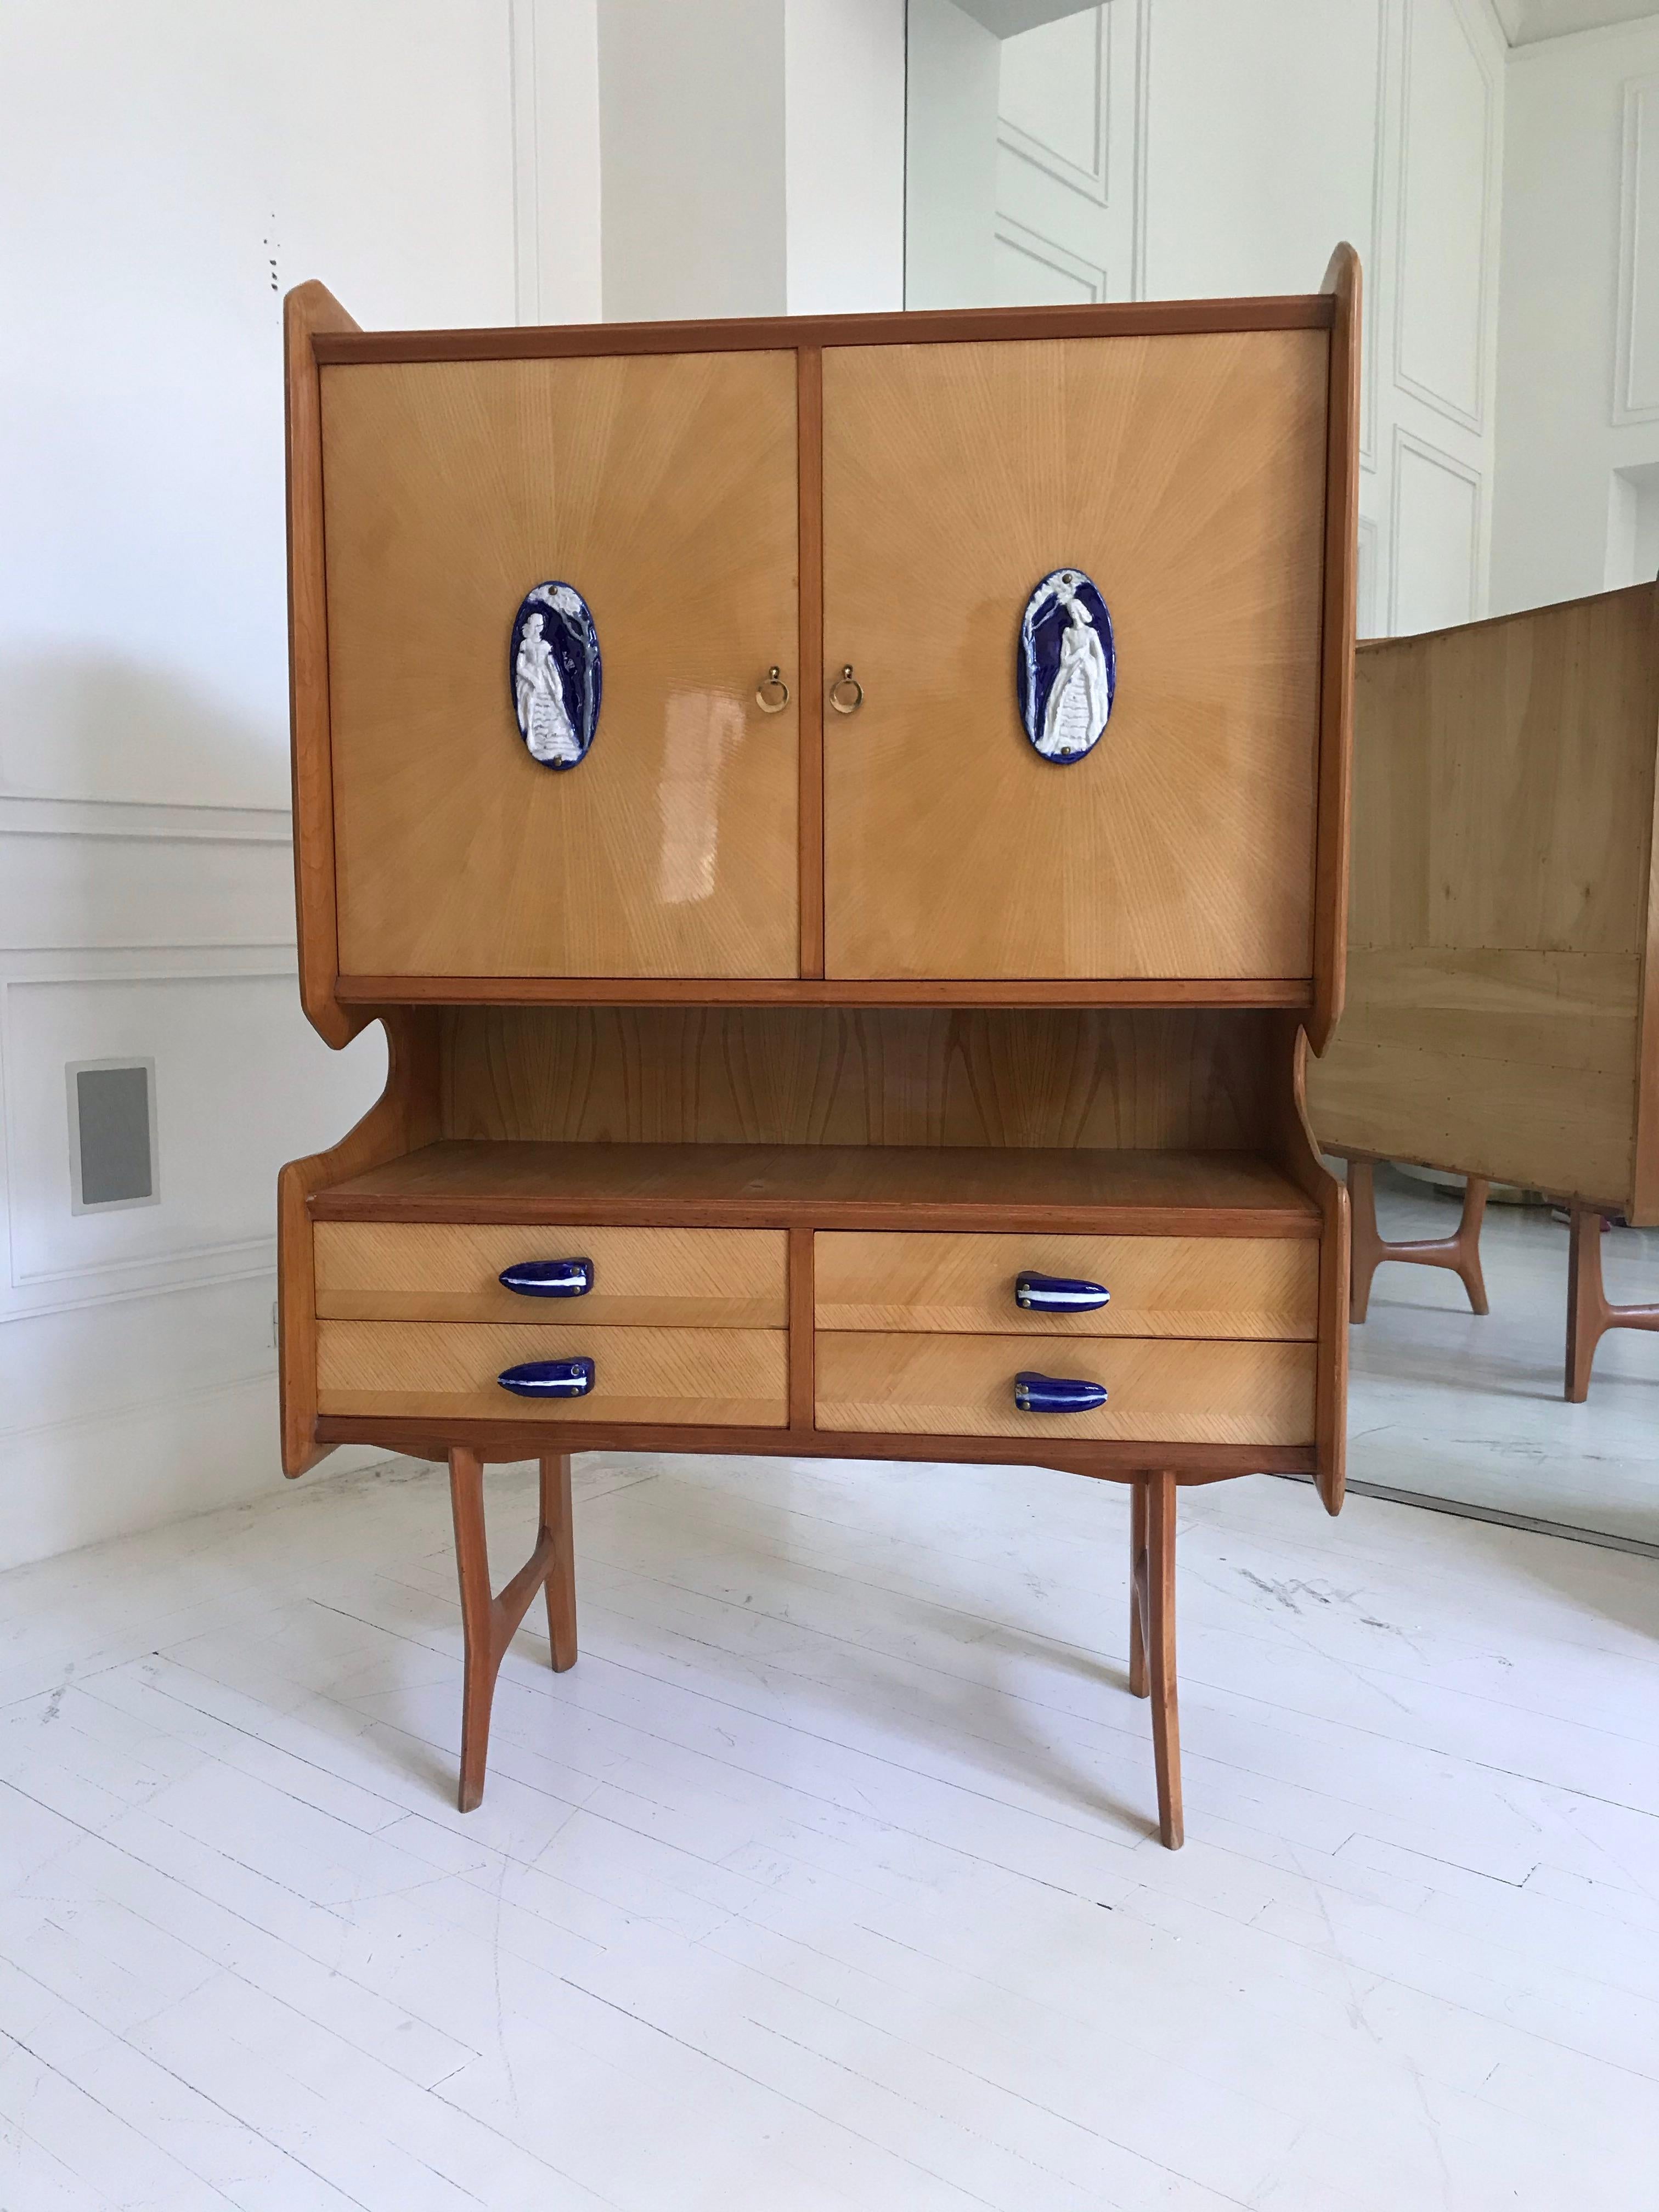 Italian vintage cabinet in the manner of Ico Parisi featuring ceramic handles, brass pulls and cartouche decorations by Richard Ginori. Constructed of sycamore wood with two doors and four drawers.